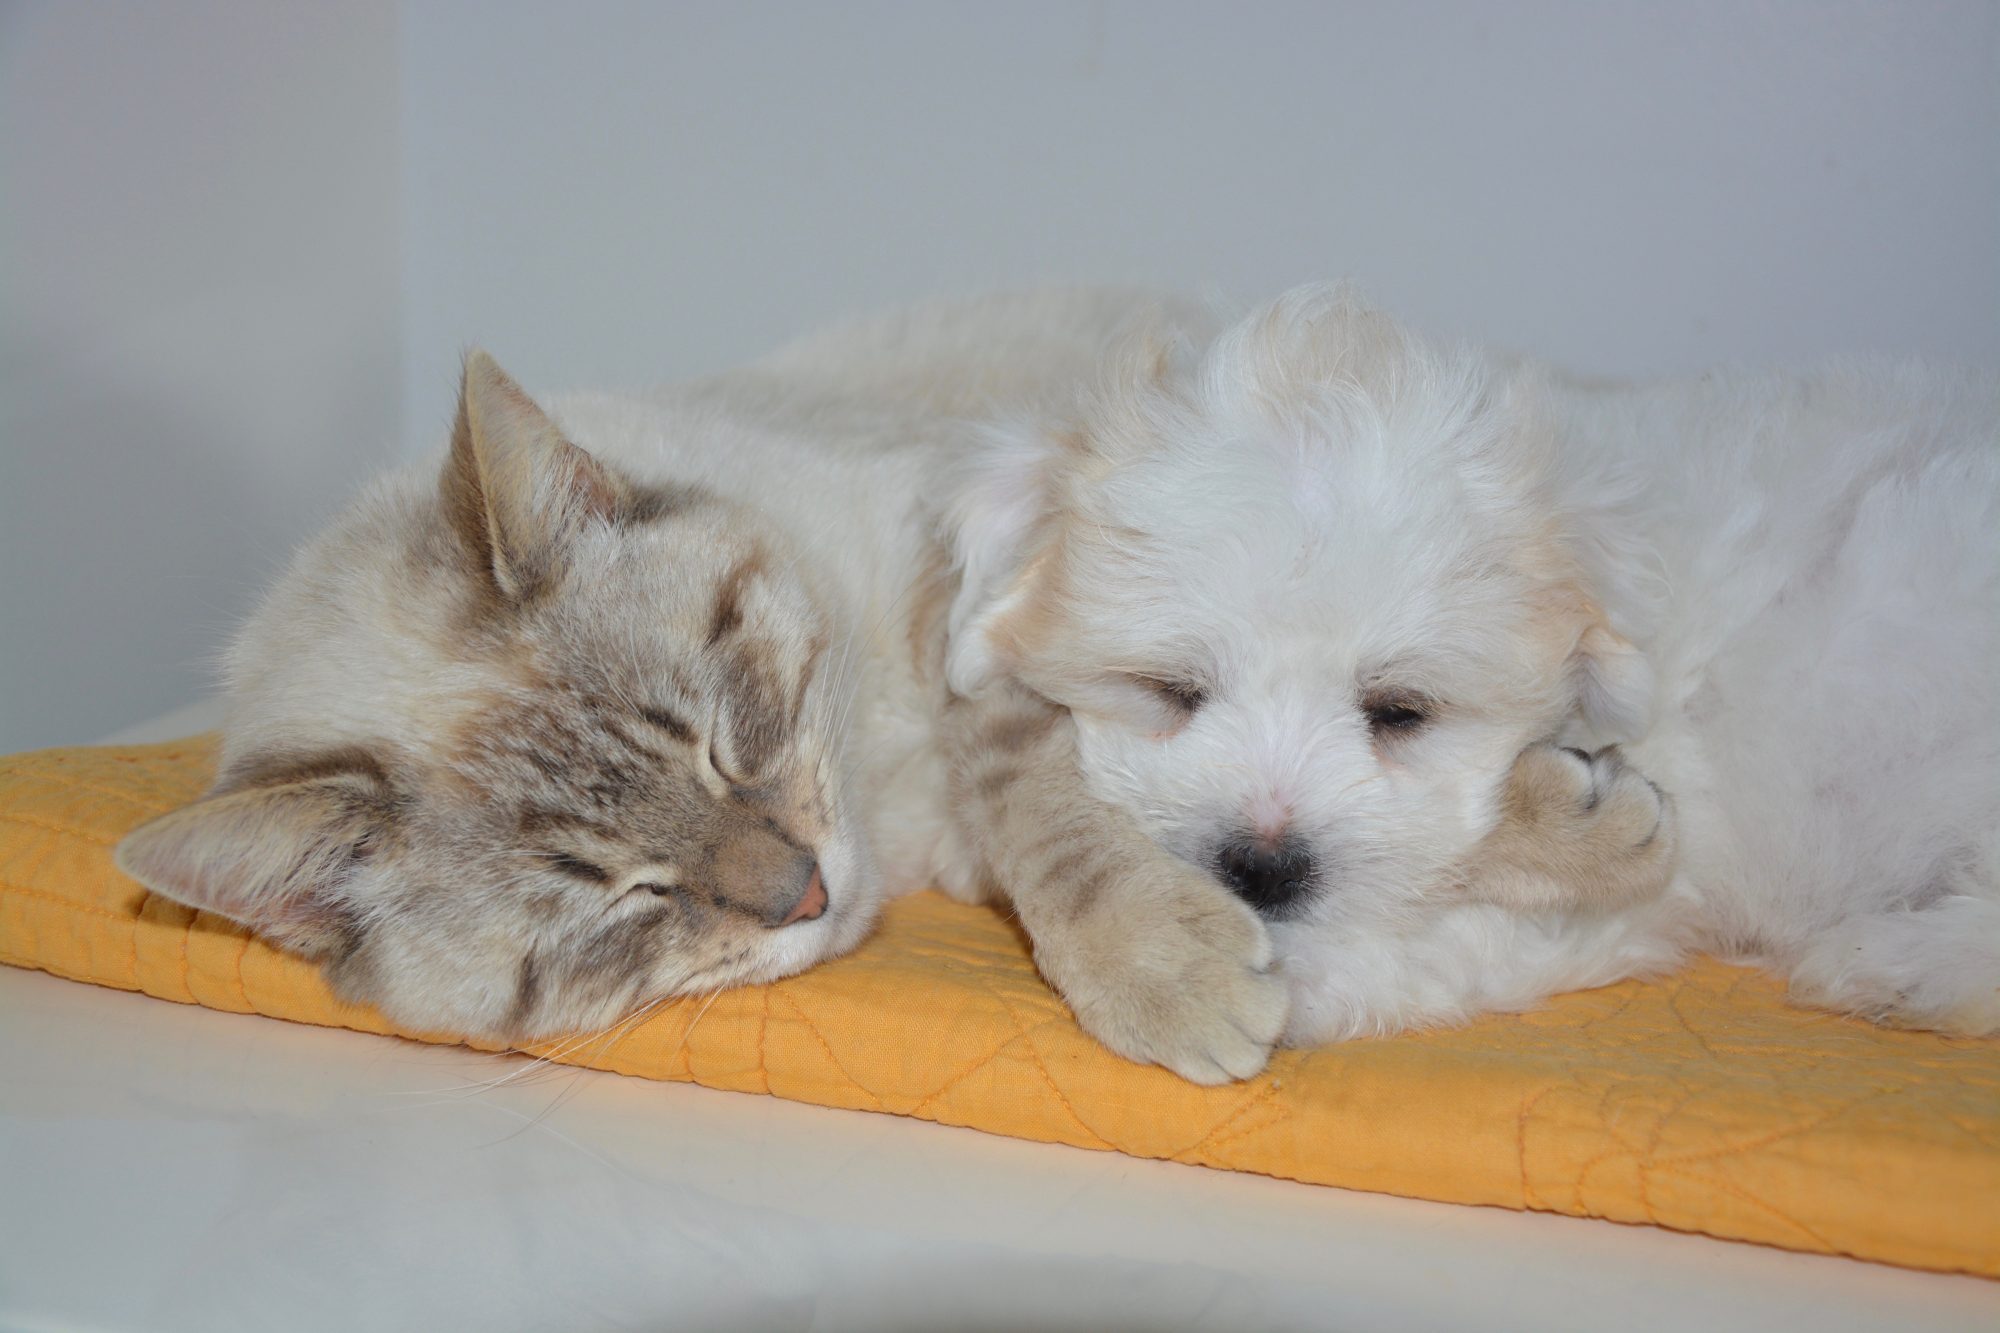 A cat and puppy cuddling